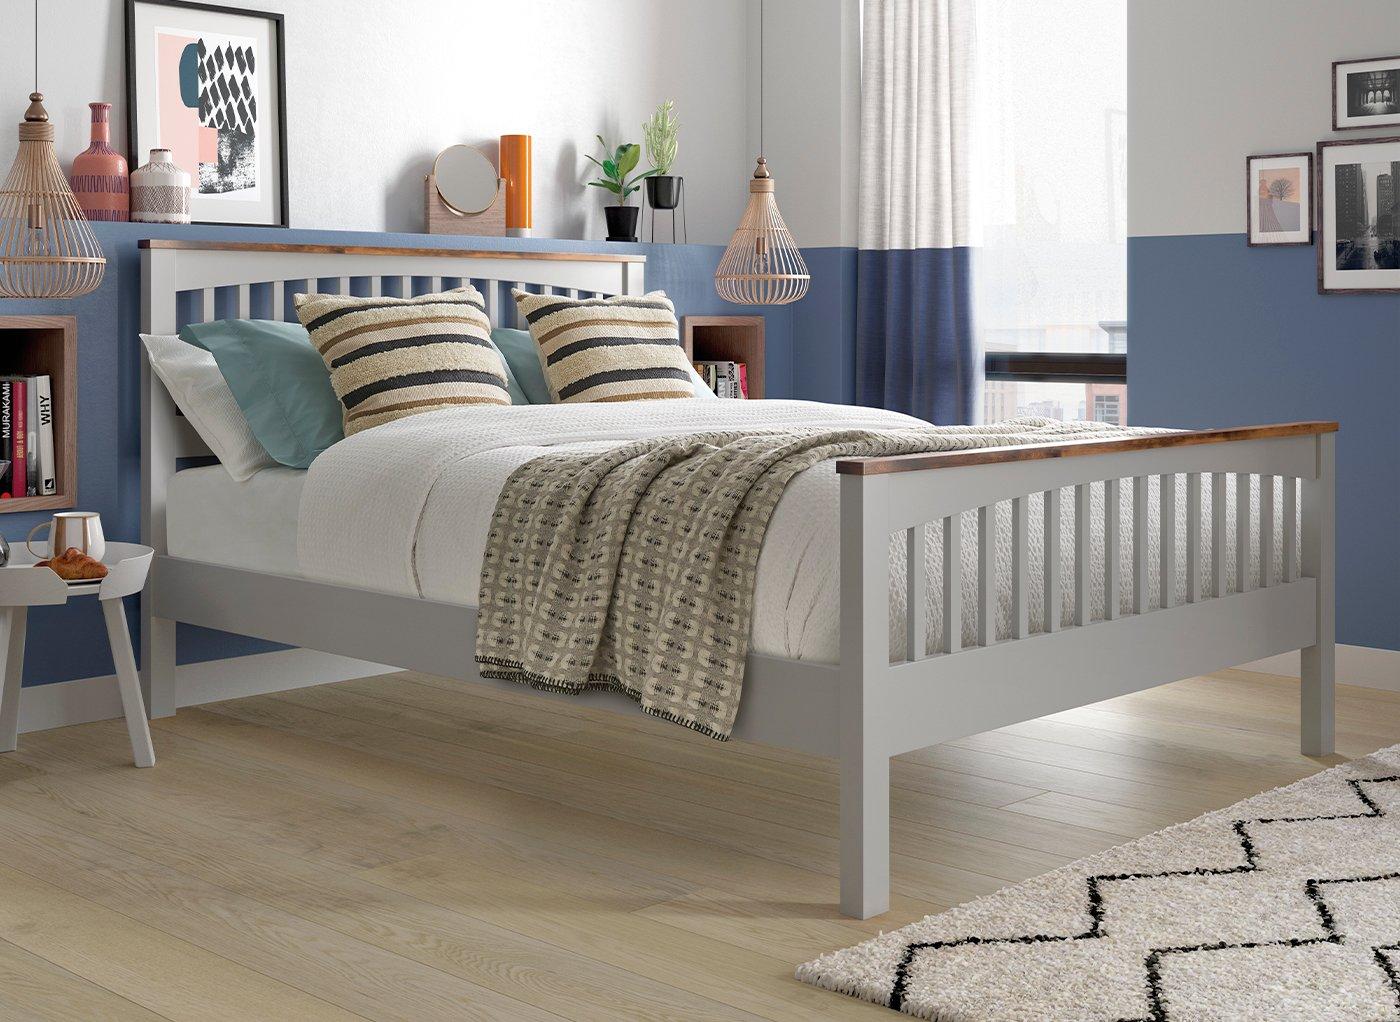 Fleetwood Two Tone Wooden Bed Frame 4 6, Grey Bed Frame Wood